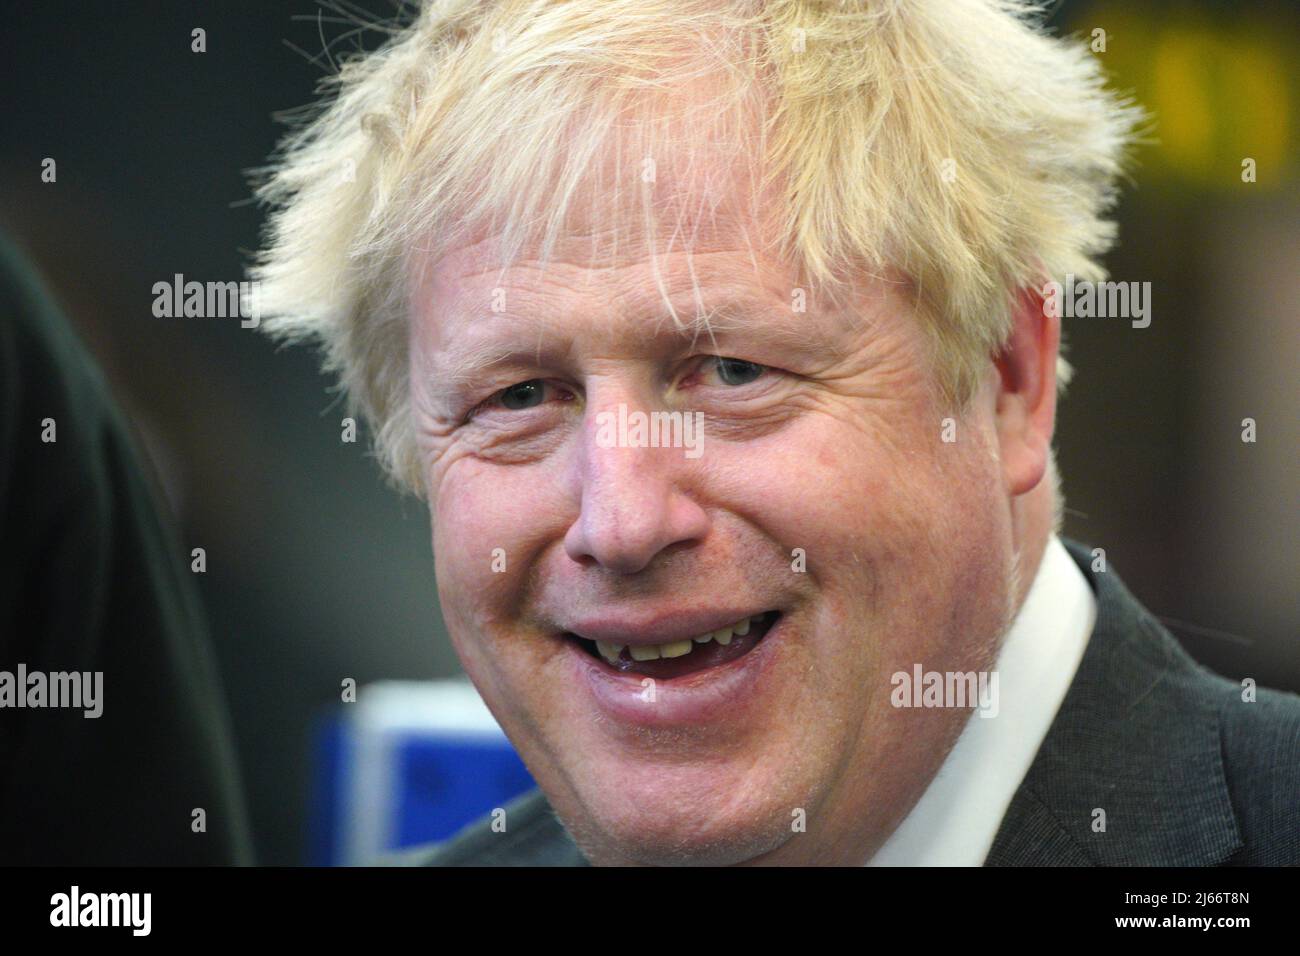 Prime Minister Boris Johnson during a campaign visit to Burnley College Sixth Form Centre in Burnley, Lancashire. Picture date: Thursday April 28, 2022. Stock Photo